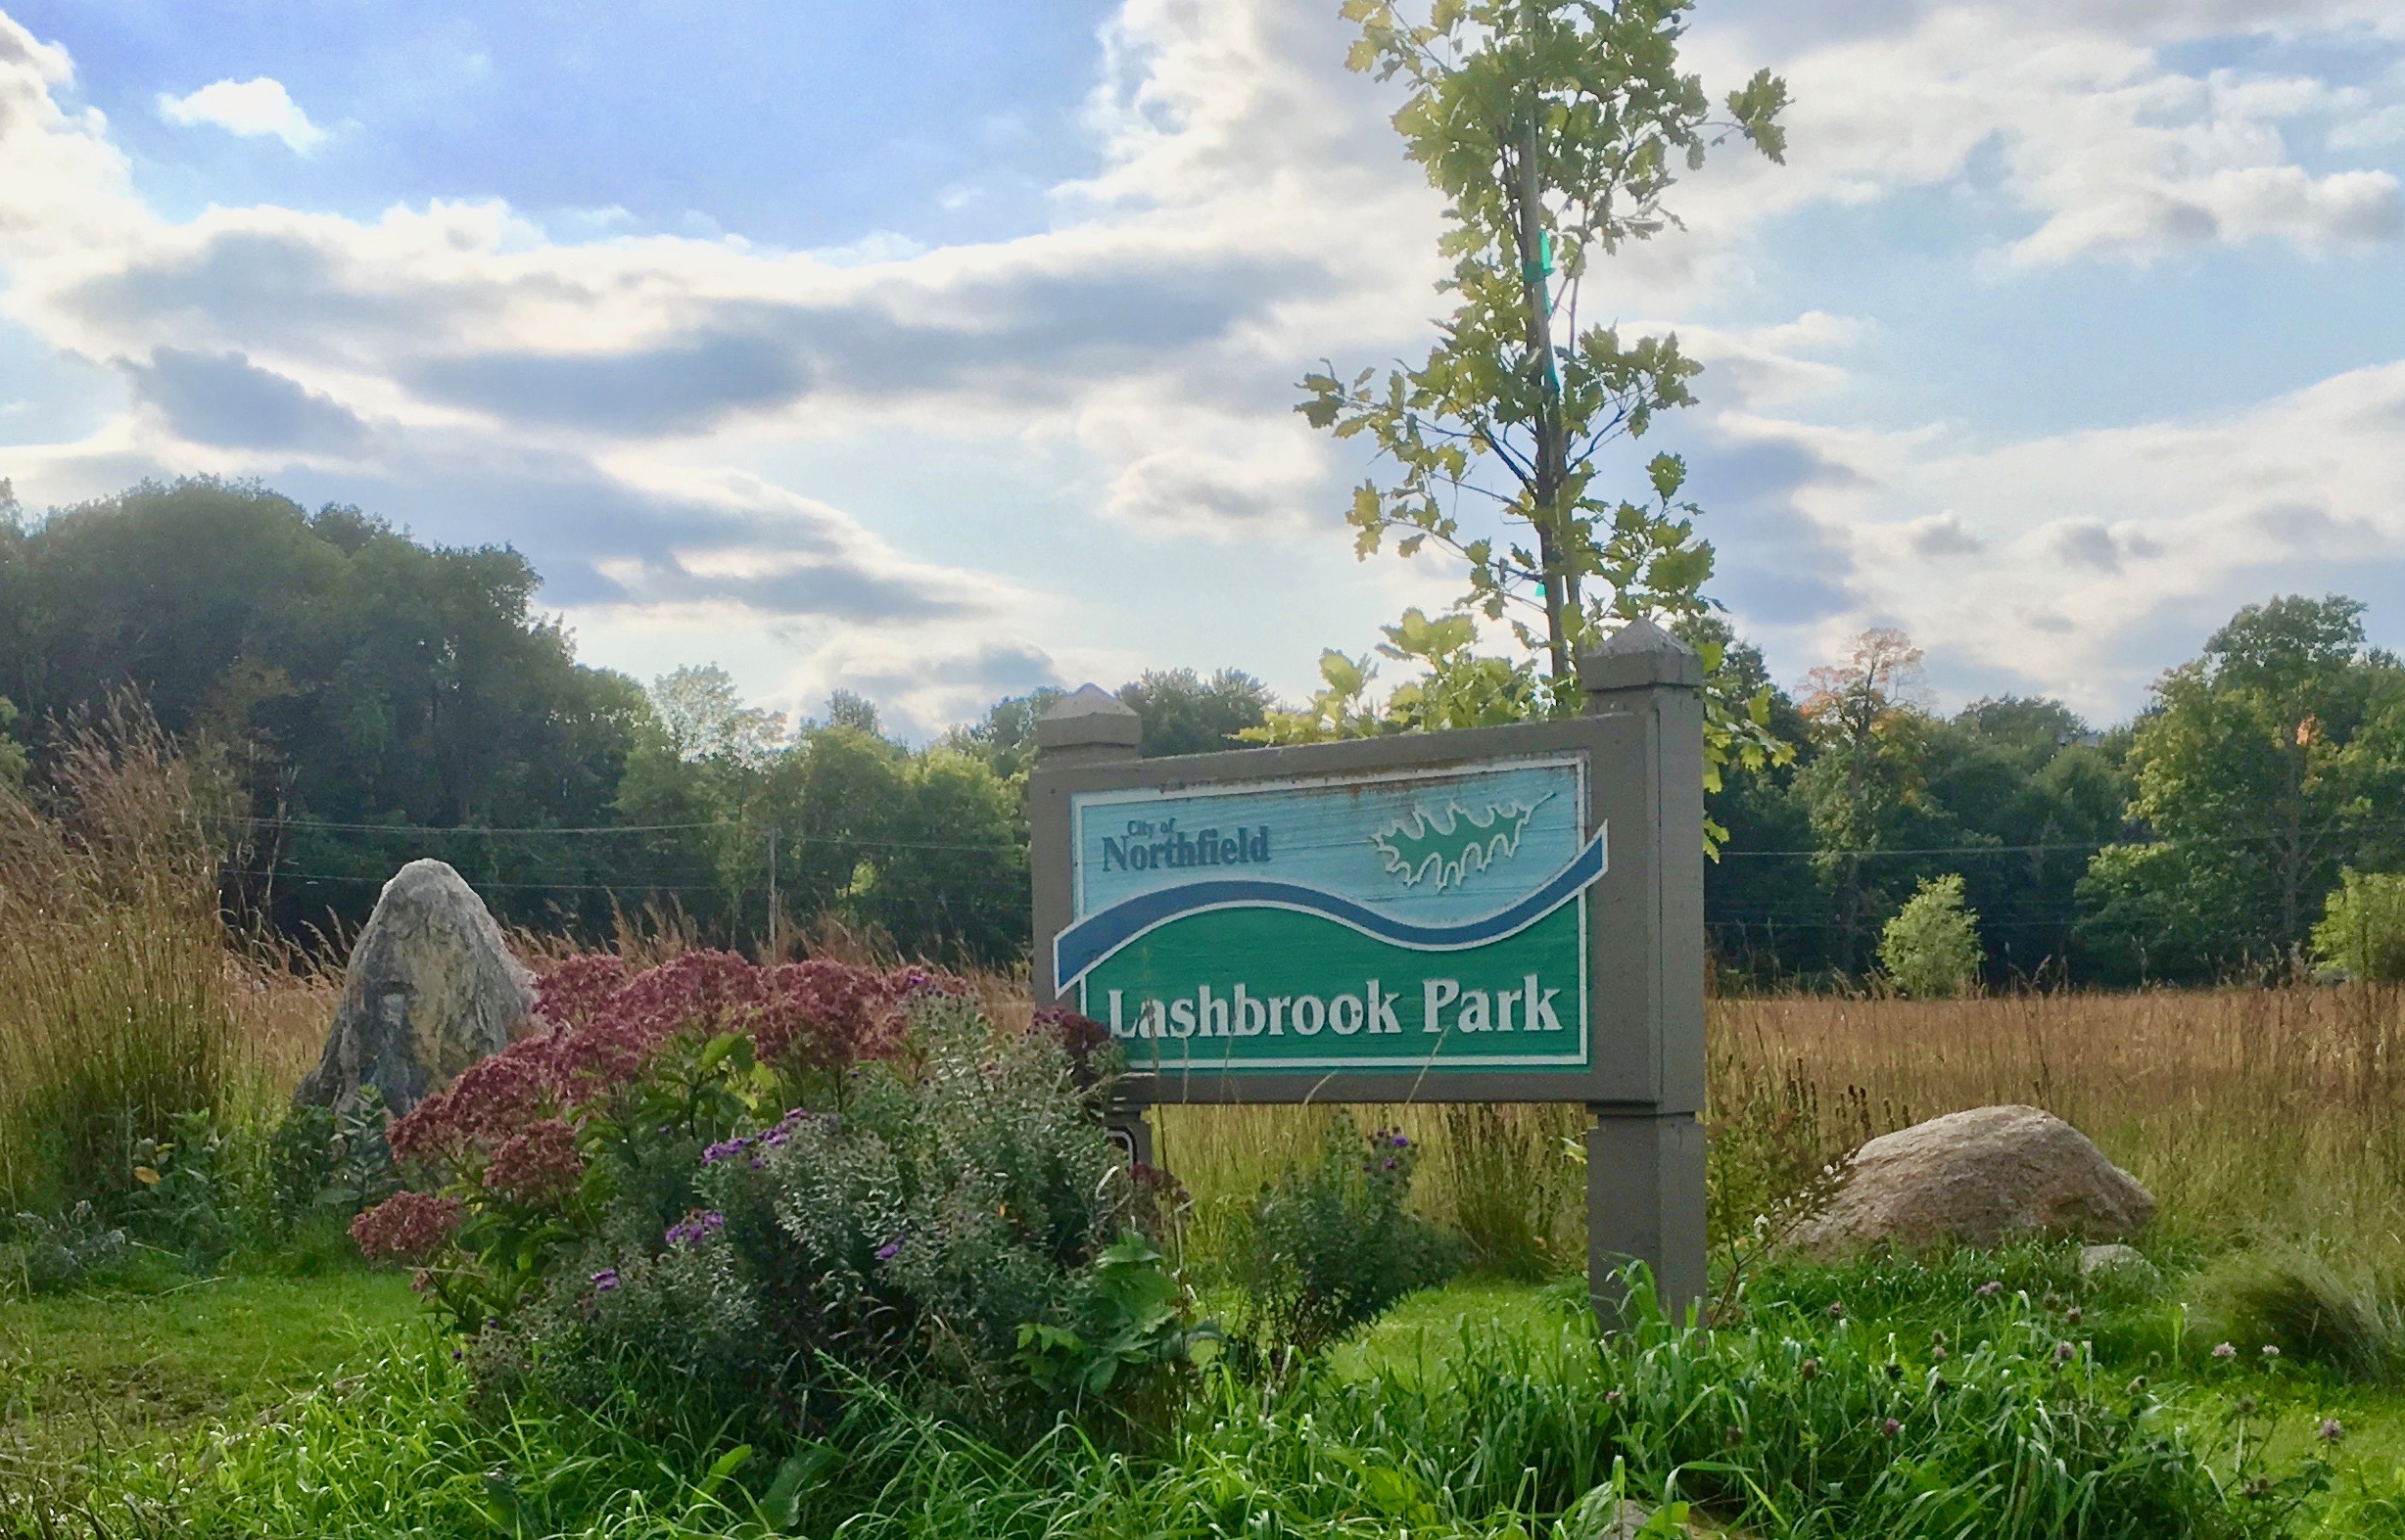 lashbrook park sign with greenery around it